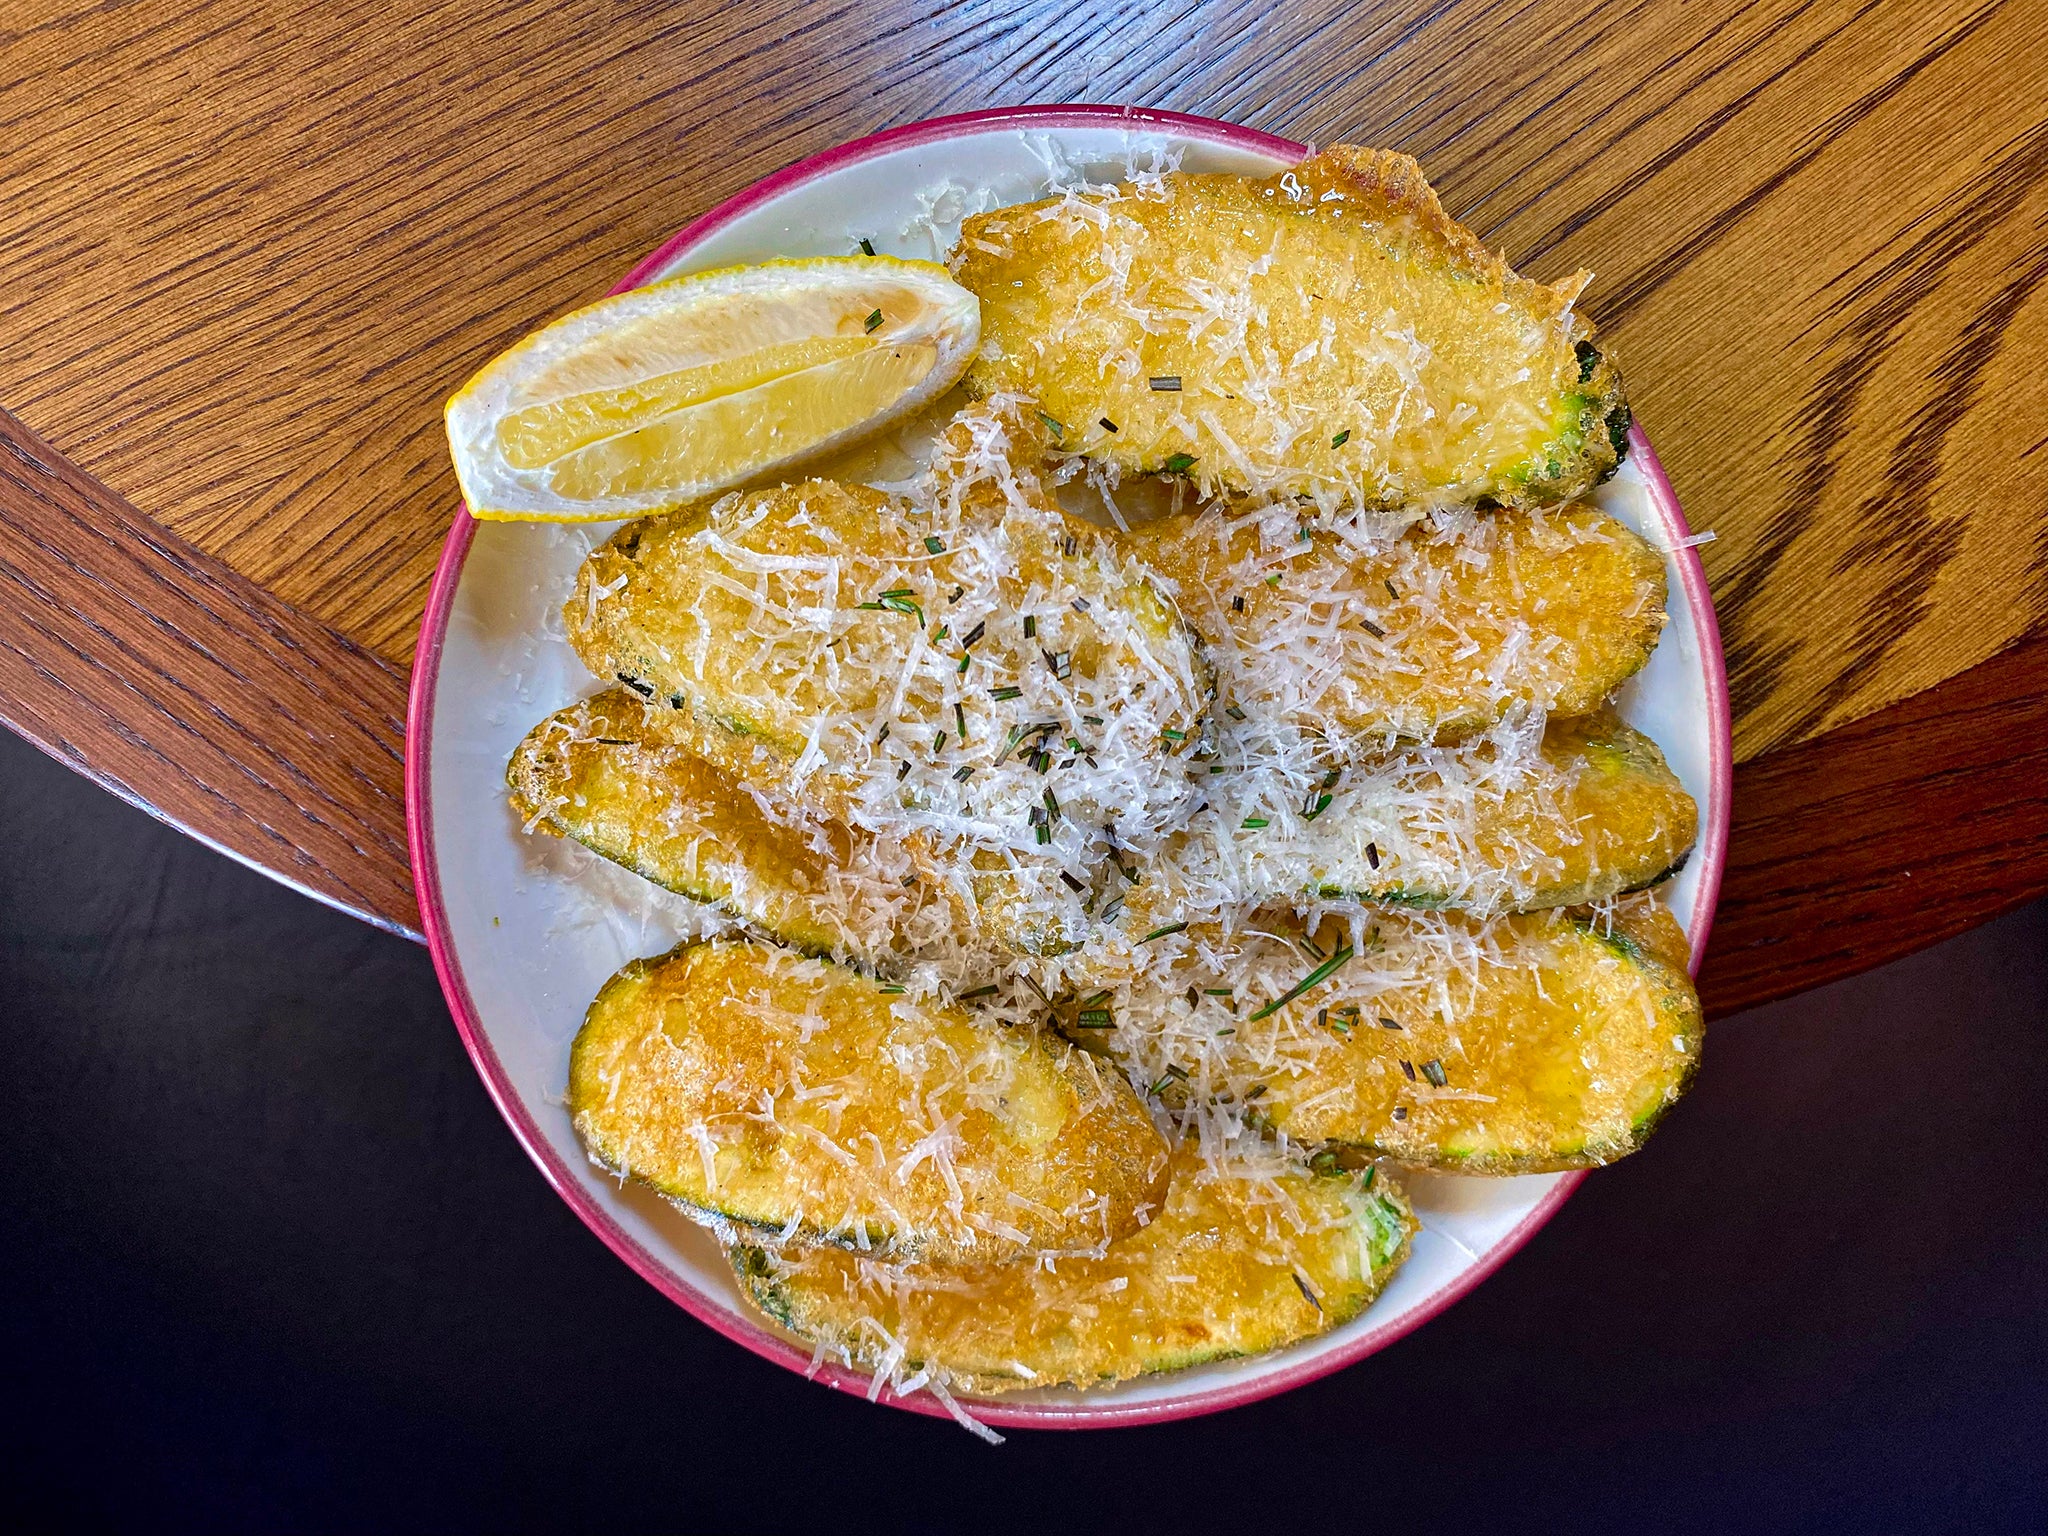 Courgette fritto: a delicious, healthy alternative to chips